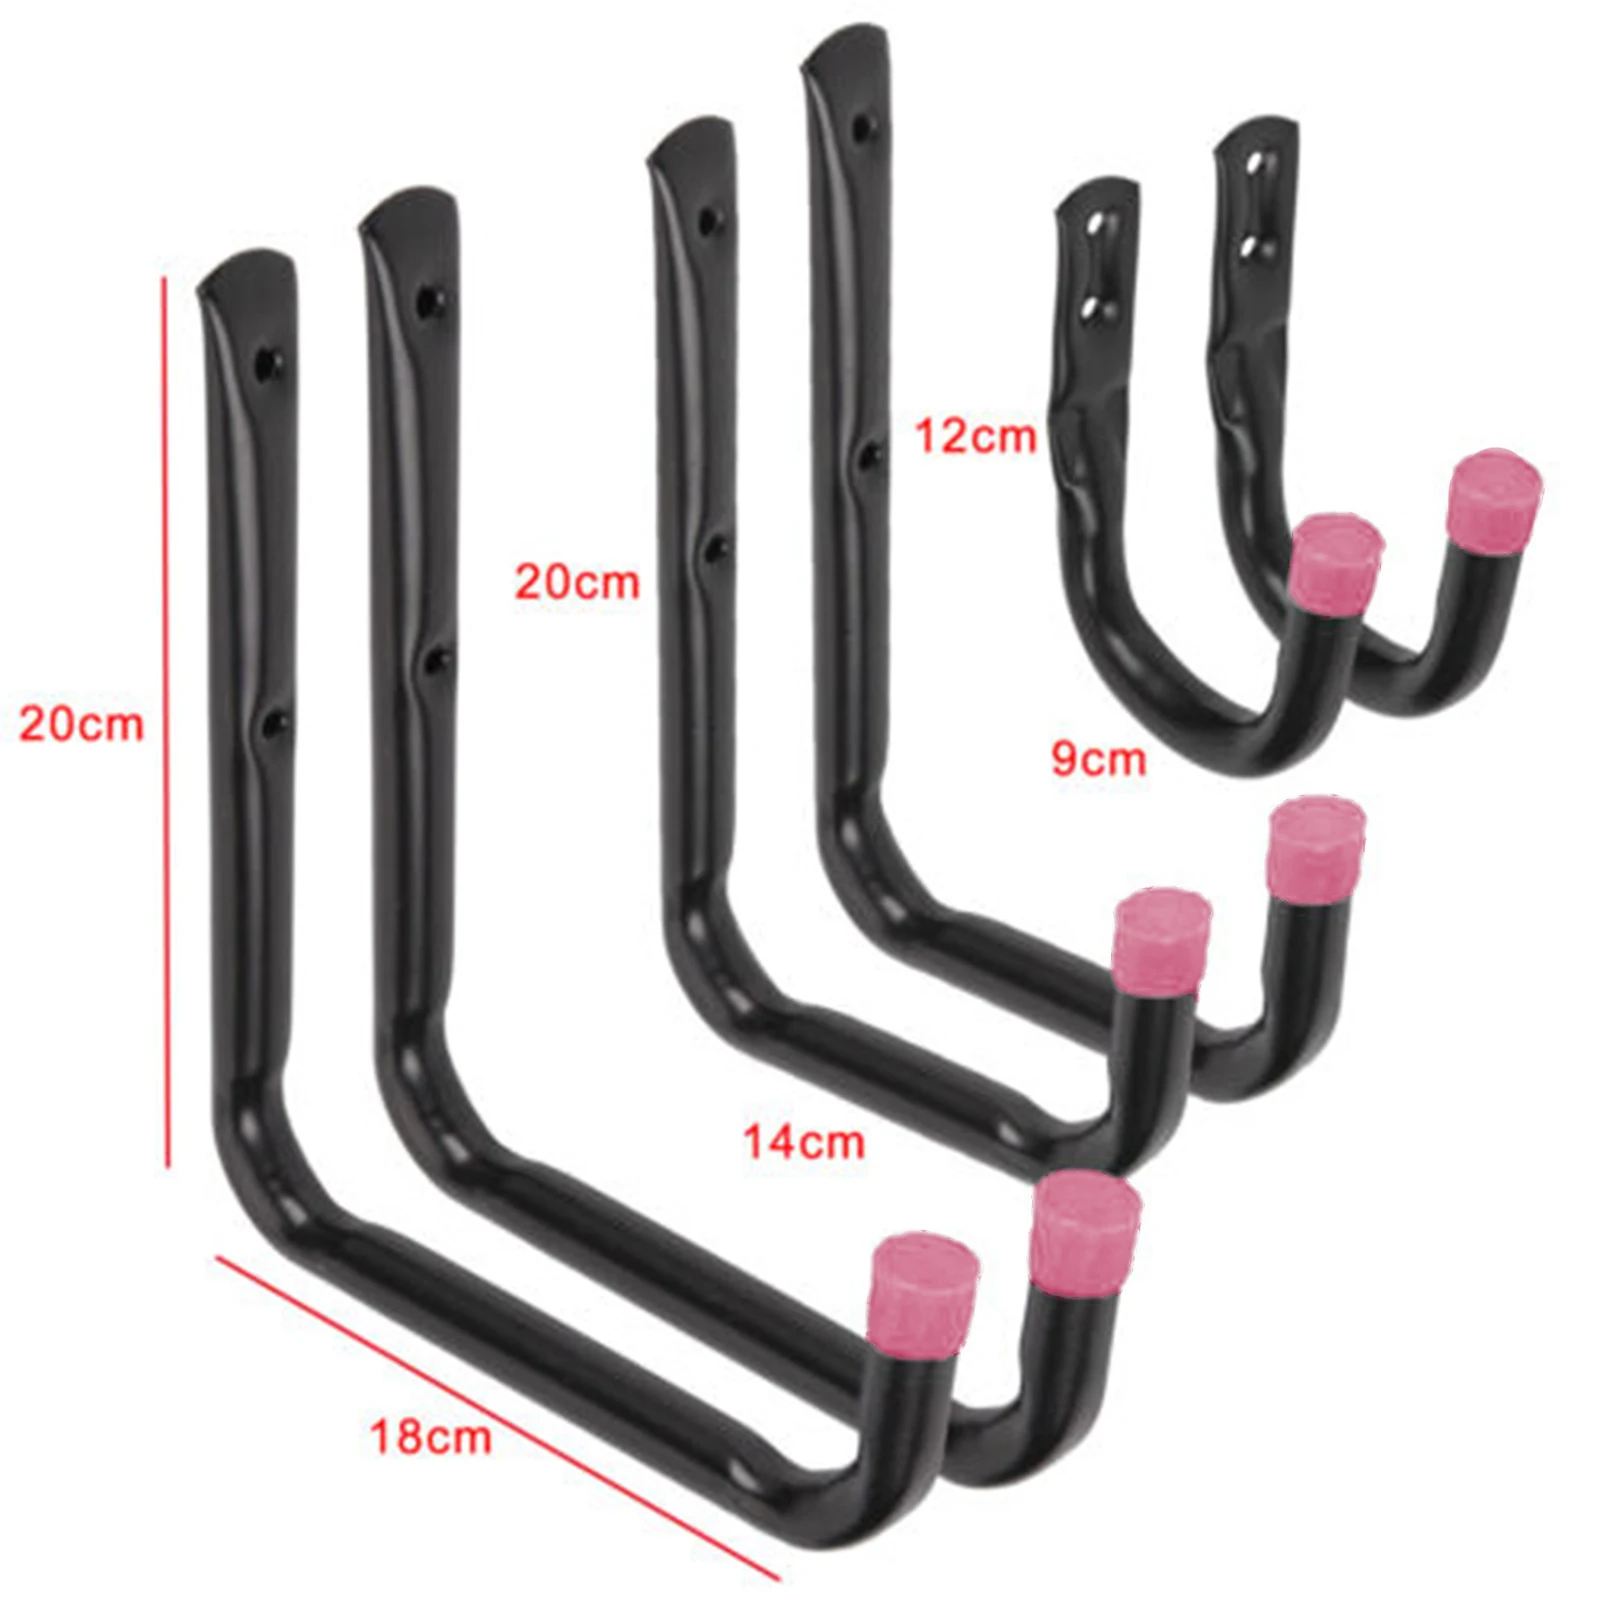 

6Pcs Wall Mounted Hooks Ladder Hose Tools Organizer Hooks for Garden Garage Shed For storing bikes, ladders, lawn mowers